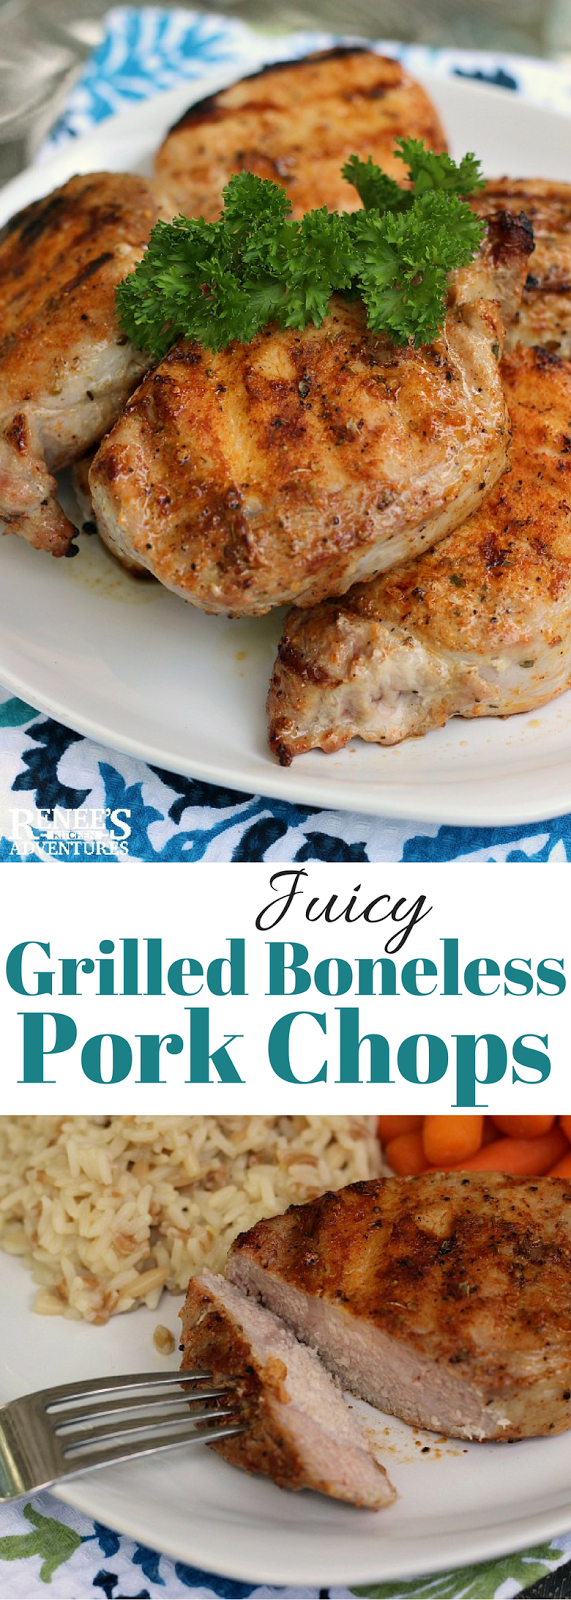 Juicy Grilled Boneless Pork Chops | Renee's Kitchen Adventures - easy grilled recipe for the best juicy grilled boneless pork chops ever! Great for weeknight dinner or summer BBQ! 